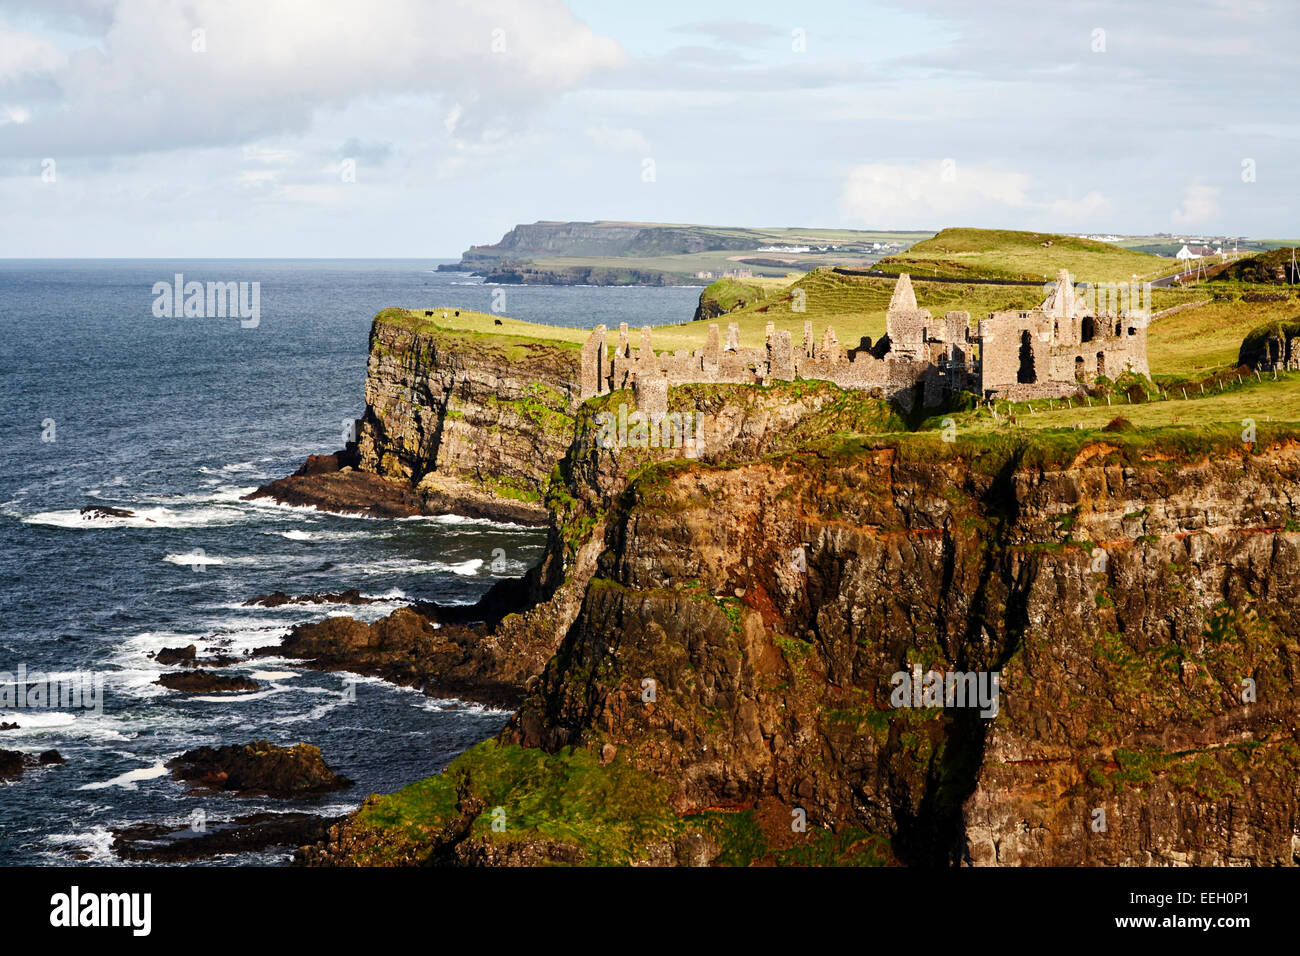 Dunluce castle on the north antrim coast game of thrones filming location for house of greyjoy Stock Photo